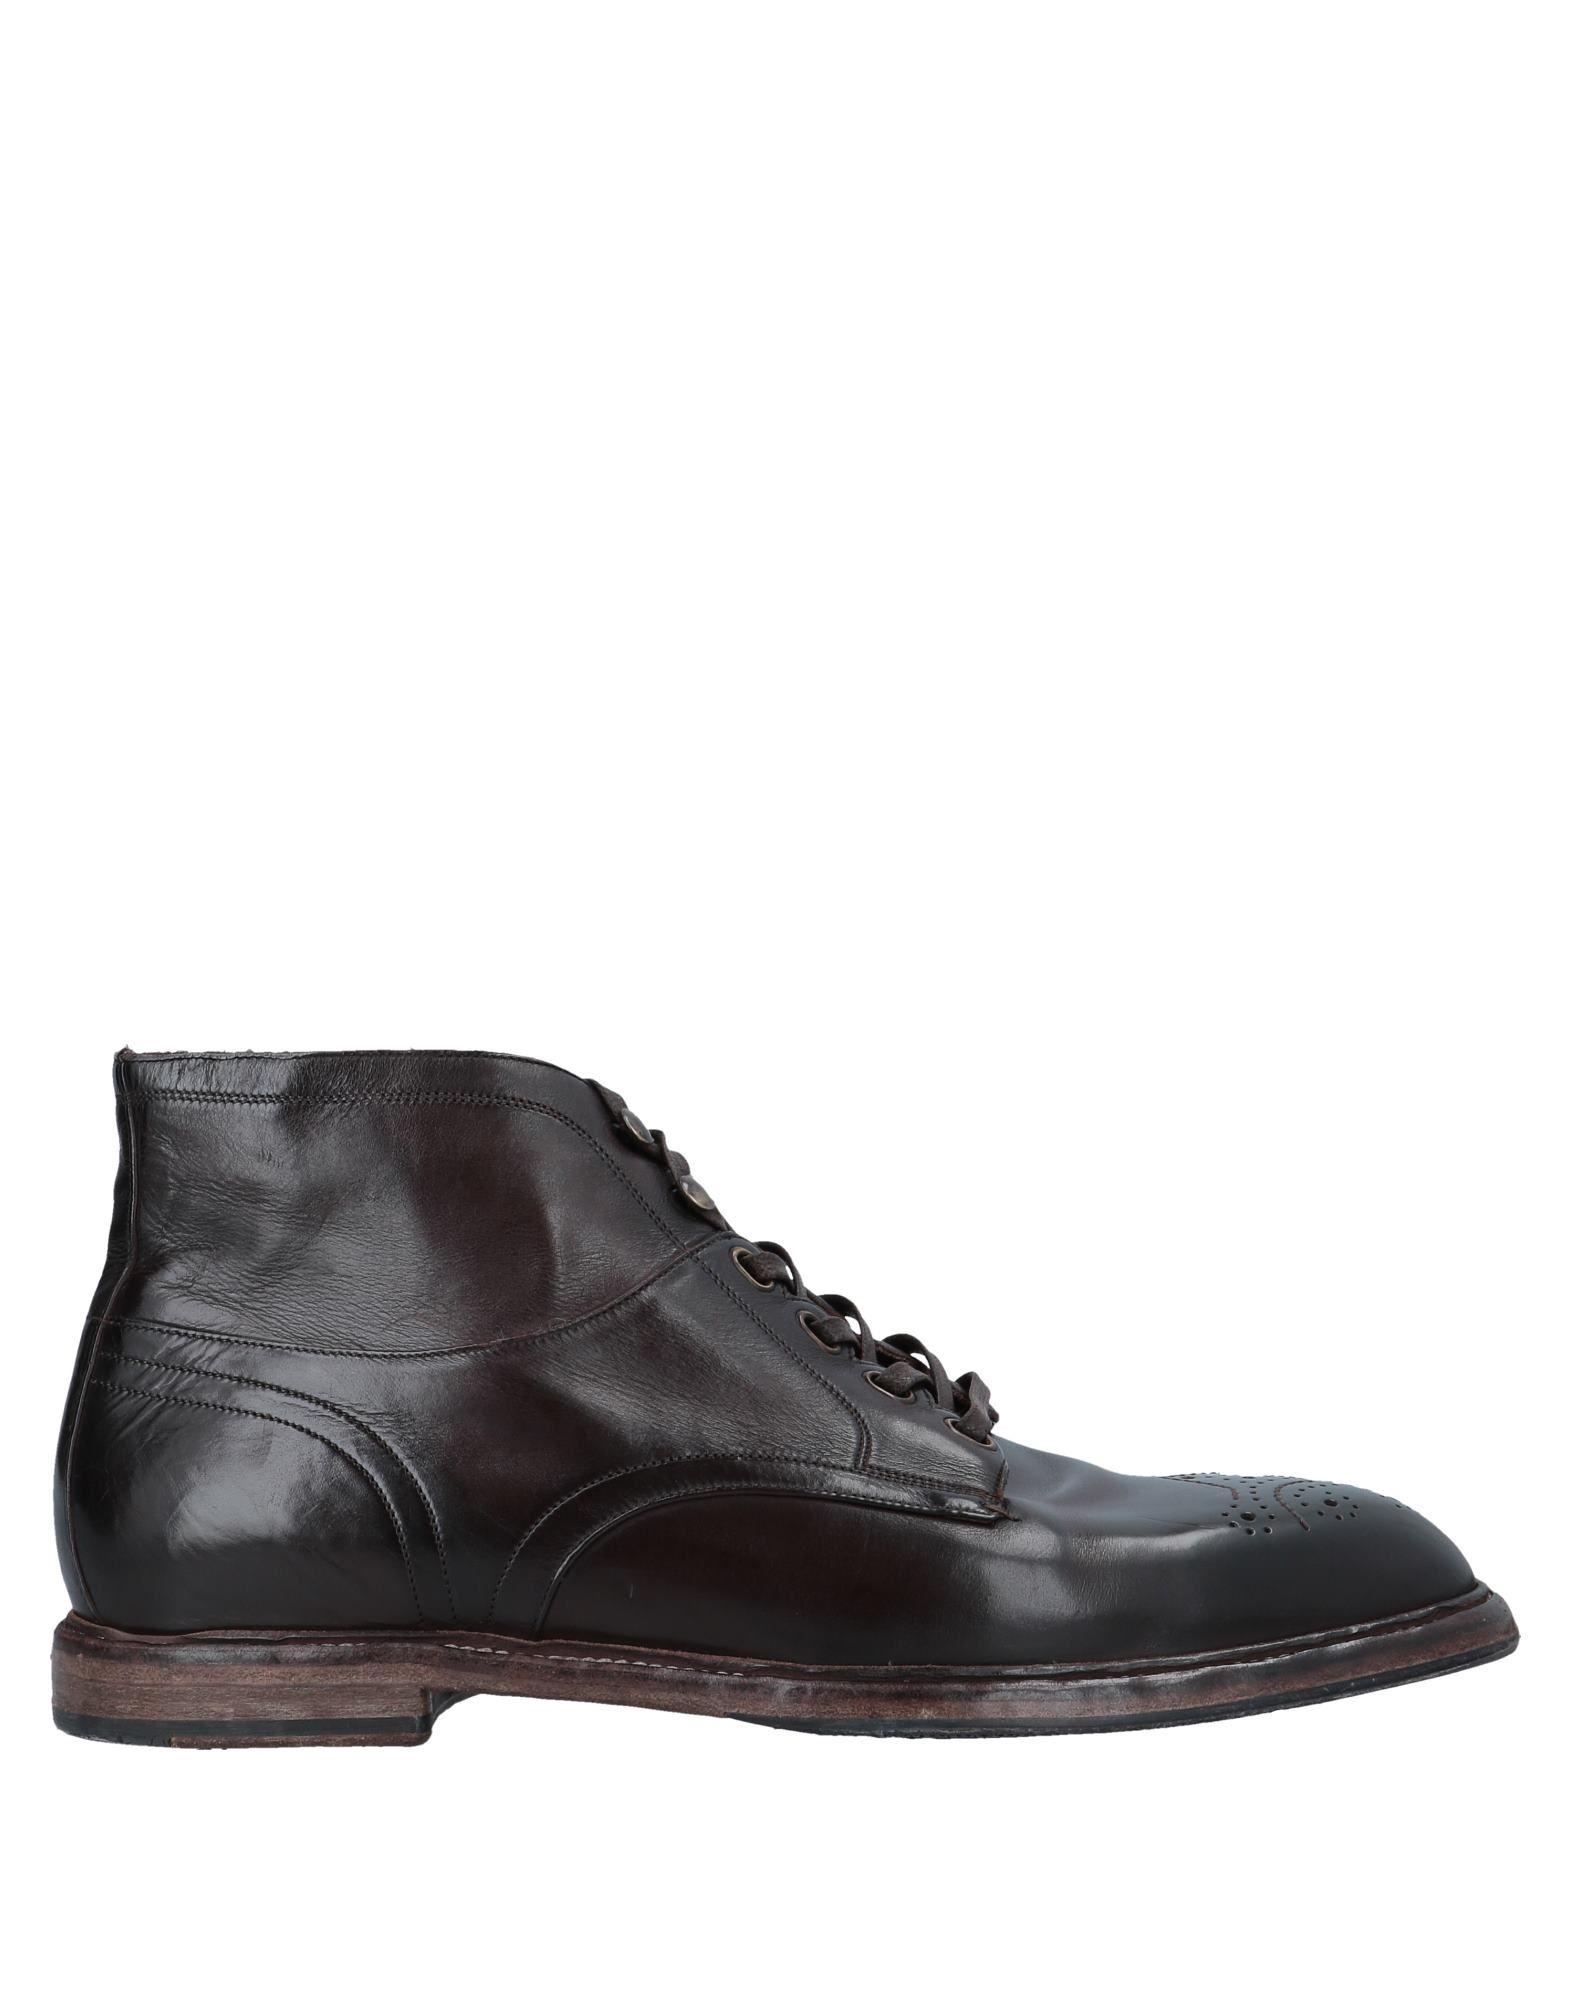 Dolce & Gabbana Leather Ankle Boots in Dark Brown (Brown) for Men - Lyst